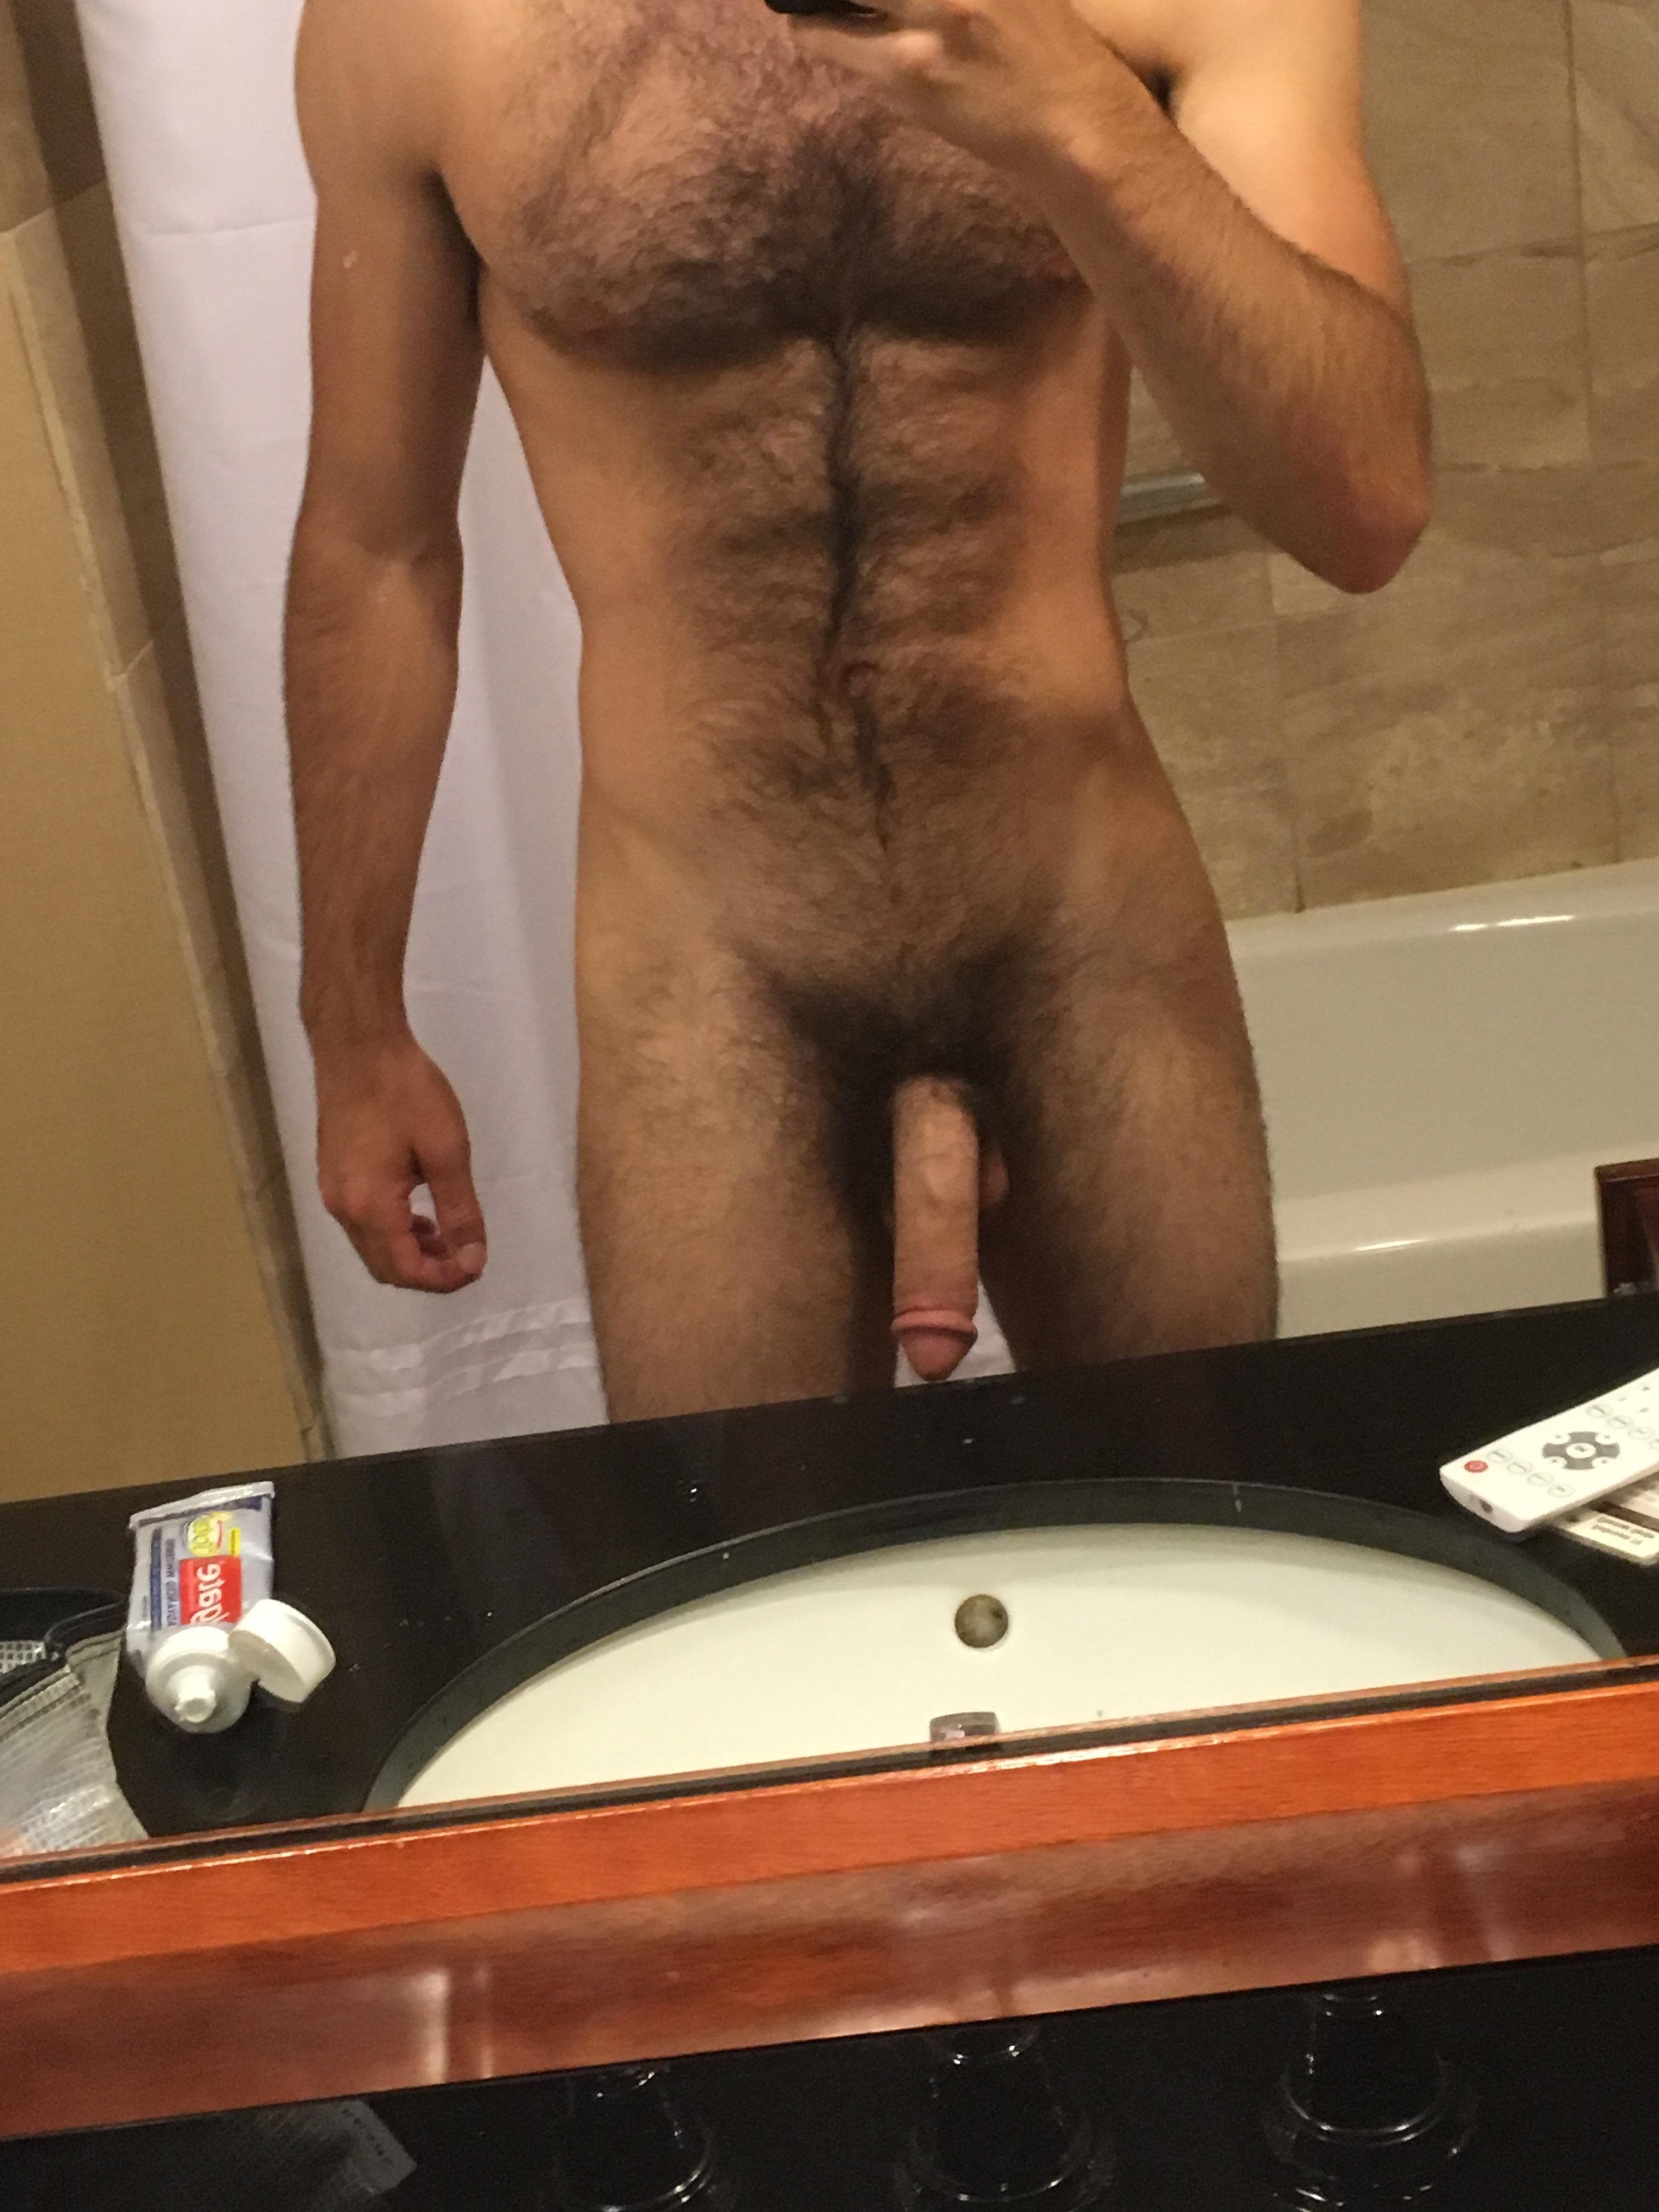 Just wanted to share my softie. PMs welcome!